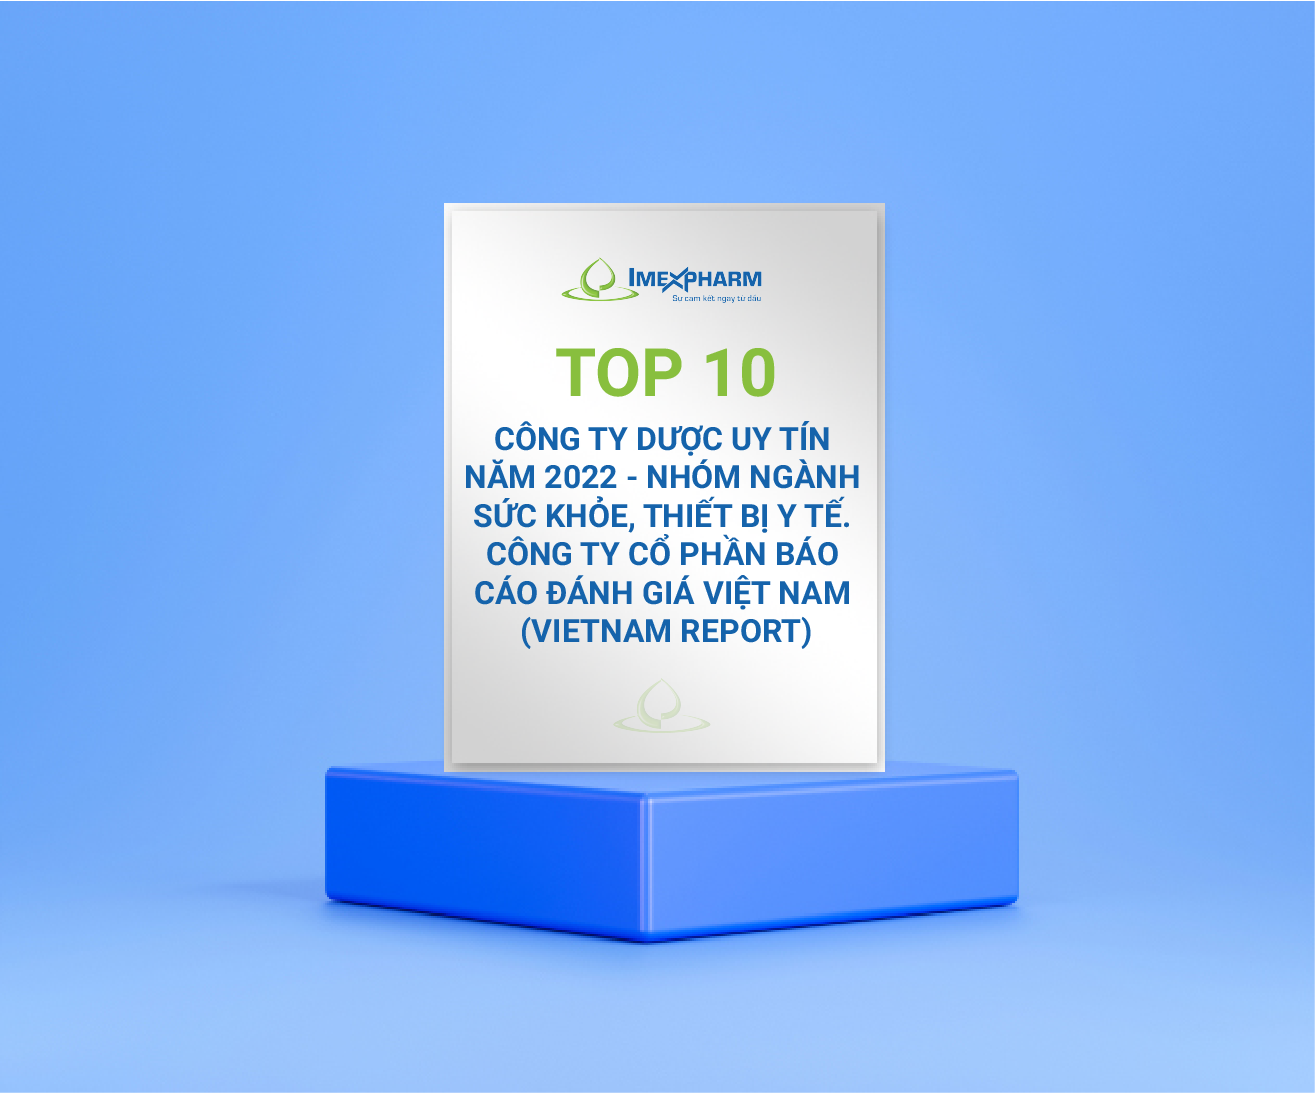 Top 10 reputable Pharmaceutical Companies in 2022 - health and medical equipment industry group. Vietnam Assessment Report Joint Stock Company (Vietnam Report)